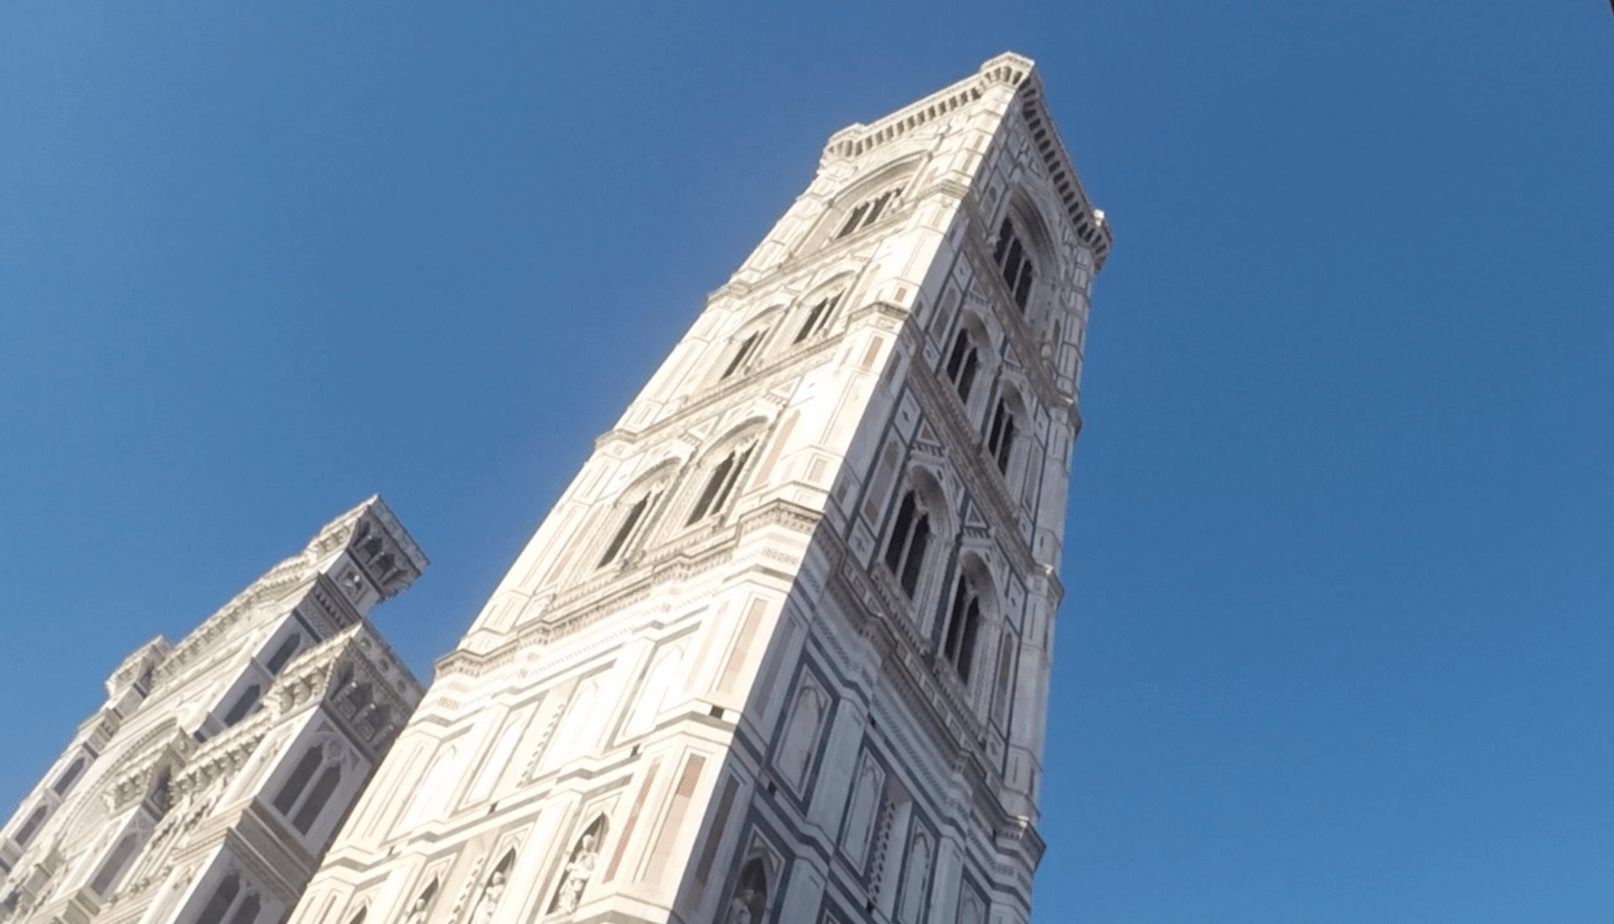 Giotto's Bell tower Florence